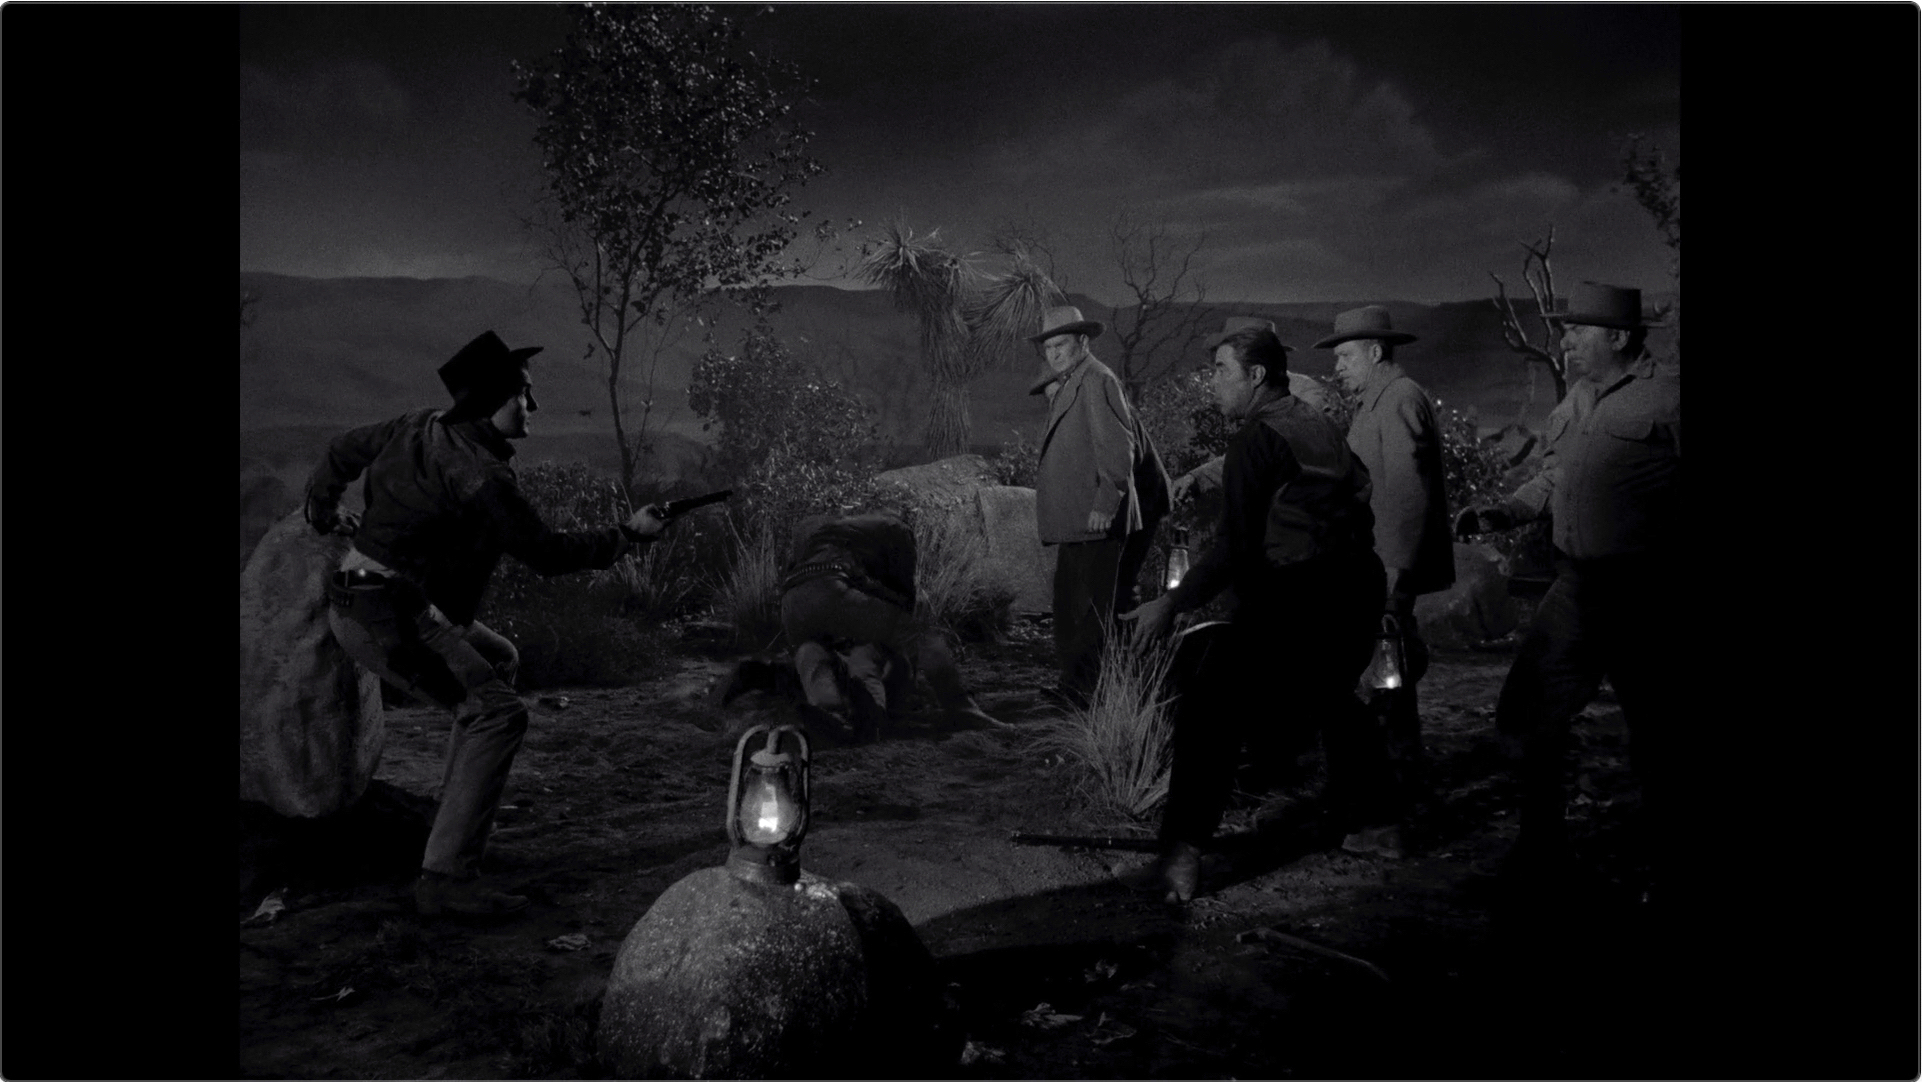 death-valley-days-s11e25-shadow-of-violence-apr-24-1963-76-jpg.218696